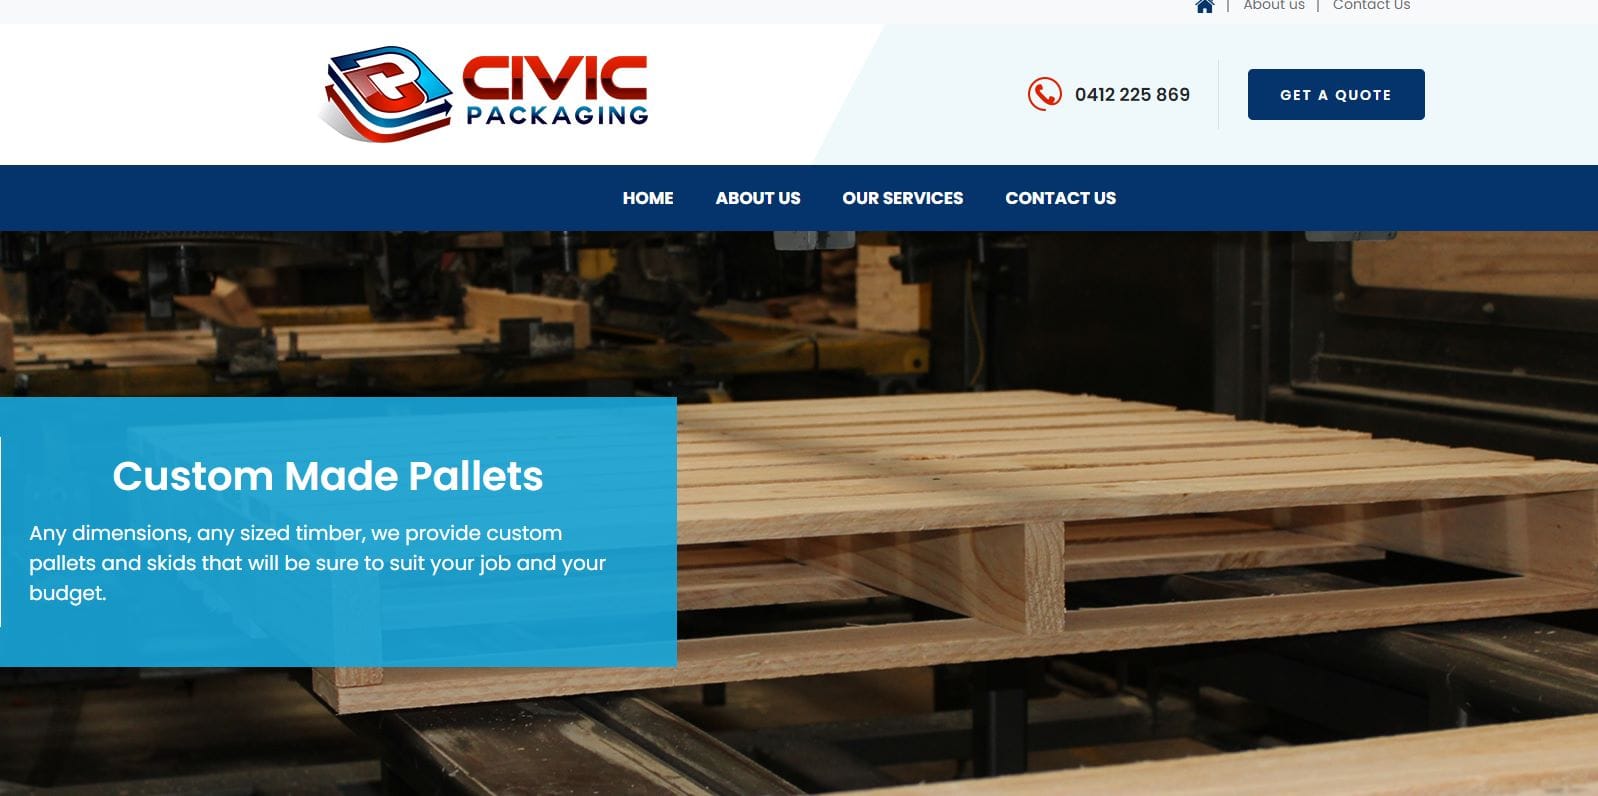 civic packaging